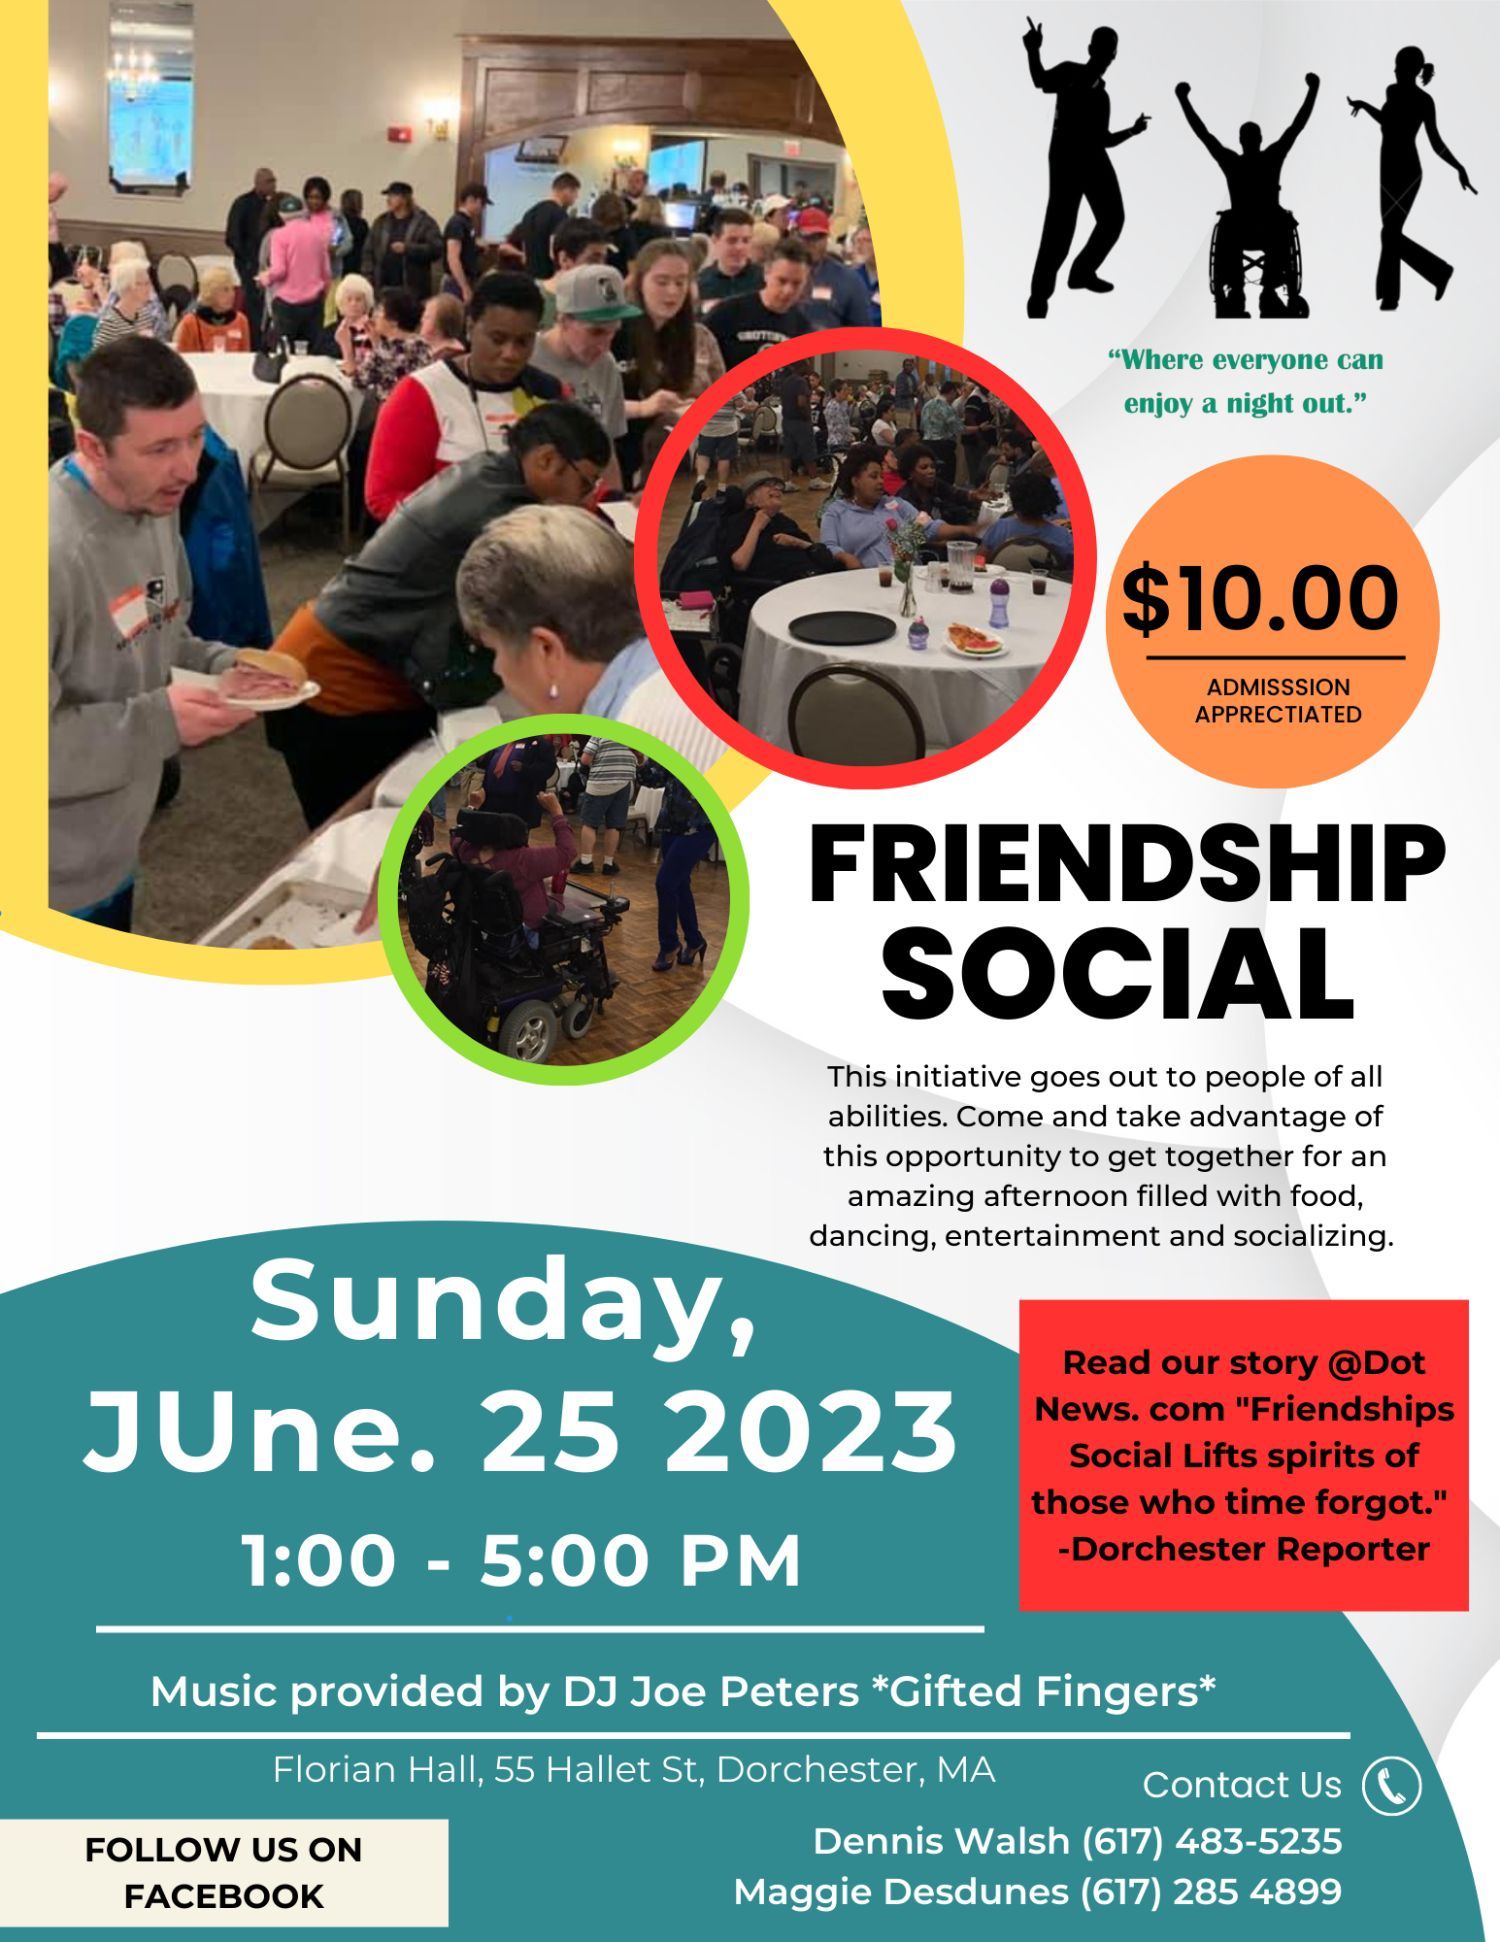 Boston disability commission. Friendship social. Image description: a flyer with multiple pictures of people of varying abilities at a large party. Text: friendship social, this initiative goes out to people of all abilities come and take a vantage of this opportunity to get together for an amazing afternoon filled with food, dancing, entertainment and socializing.. Sunday June 25, 2023, 1 PM-5 PM. Music provided by DJ Jo peters * gifted fingers*. Florian Hall, 55 Hallet Street, dorchester, MA. Contact us -Dennis Walsh 617 483 5235 or Maggie desdunes 617 285 4899